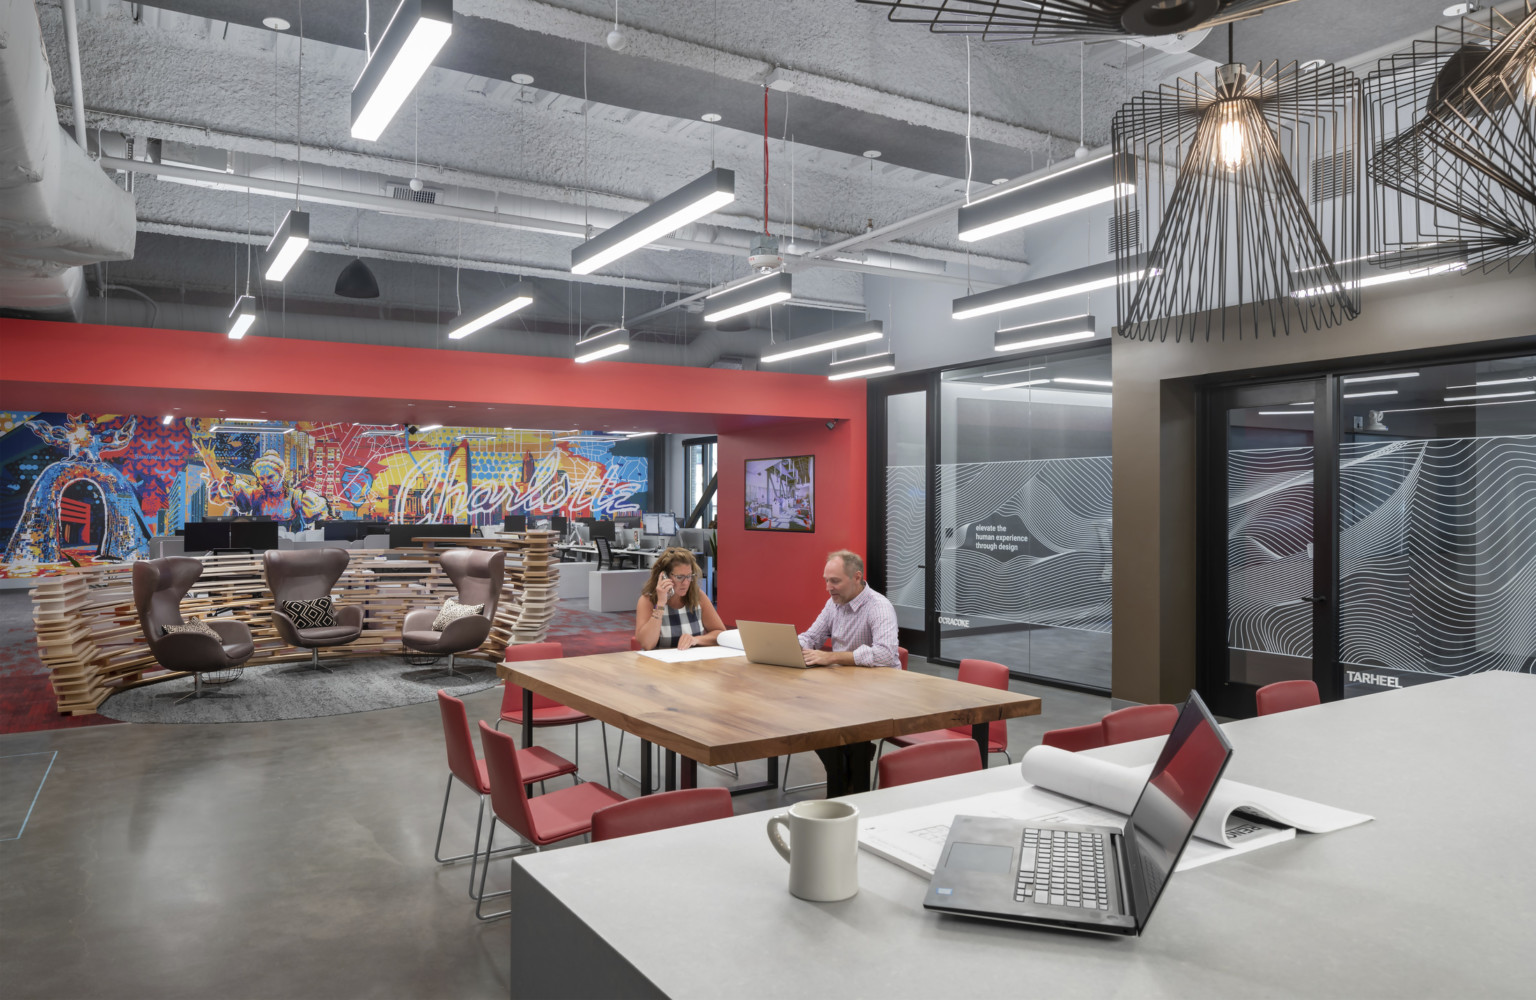 two people sit at a commons table with red chairs in the charlotte office with large mural on red wall behind them